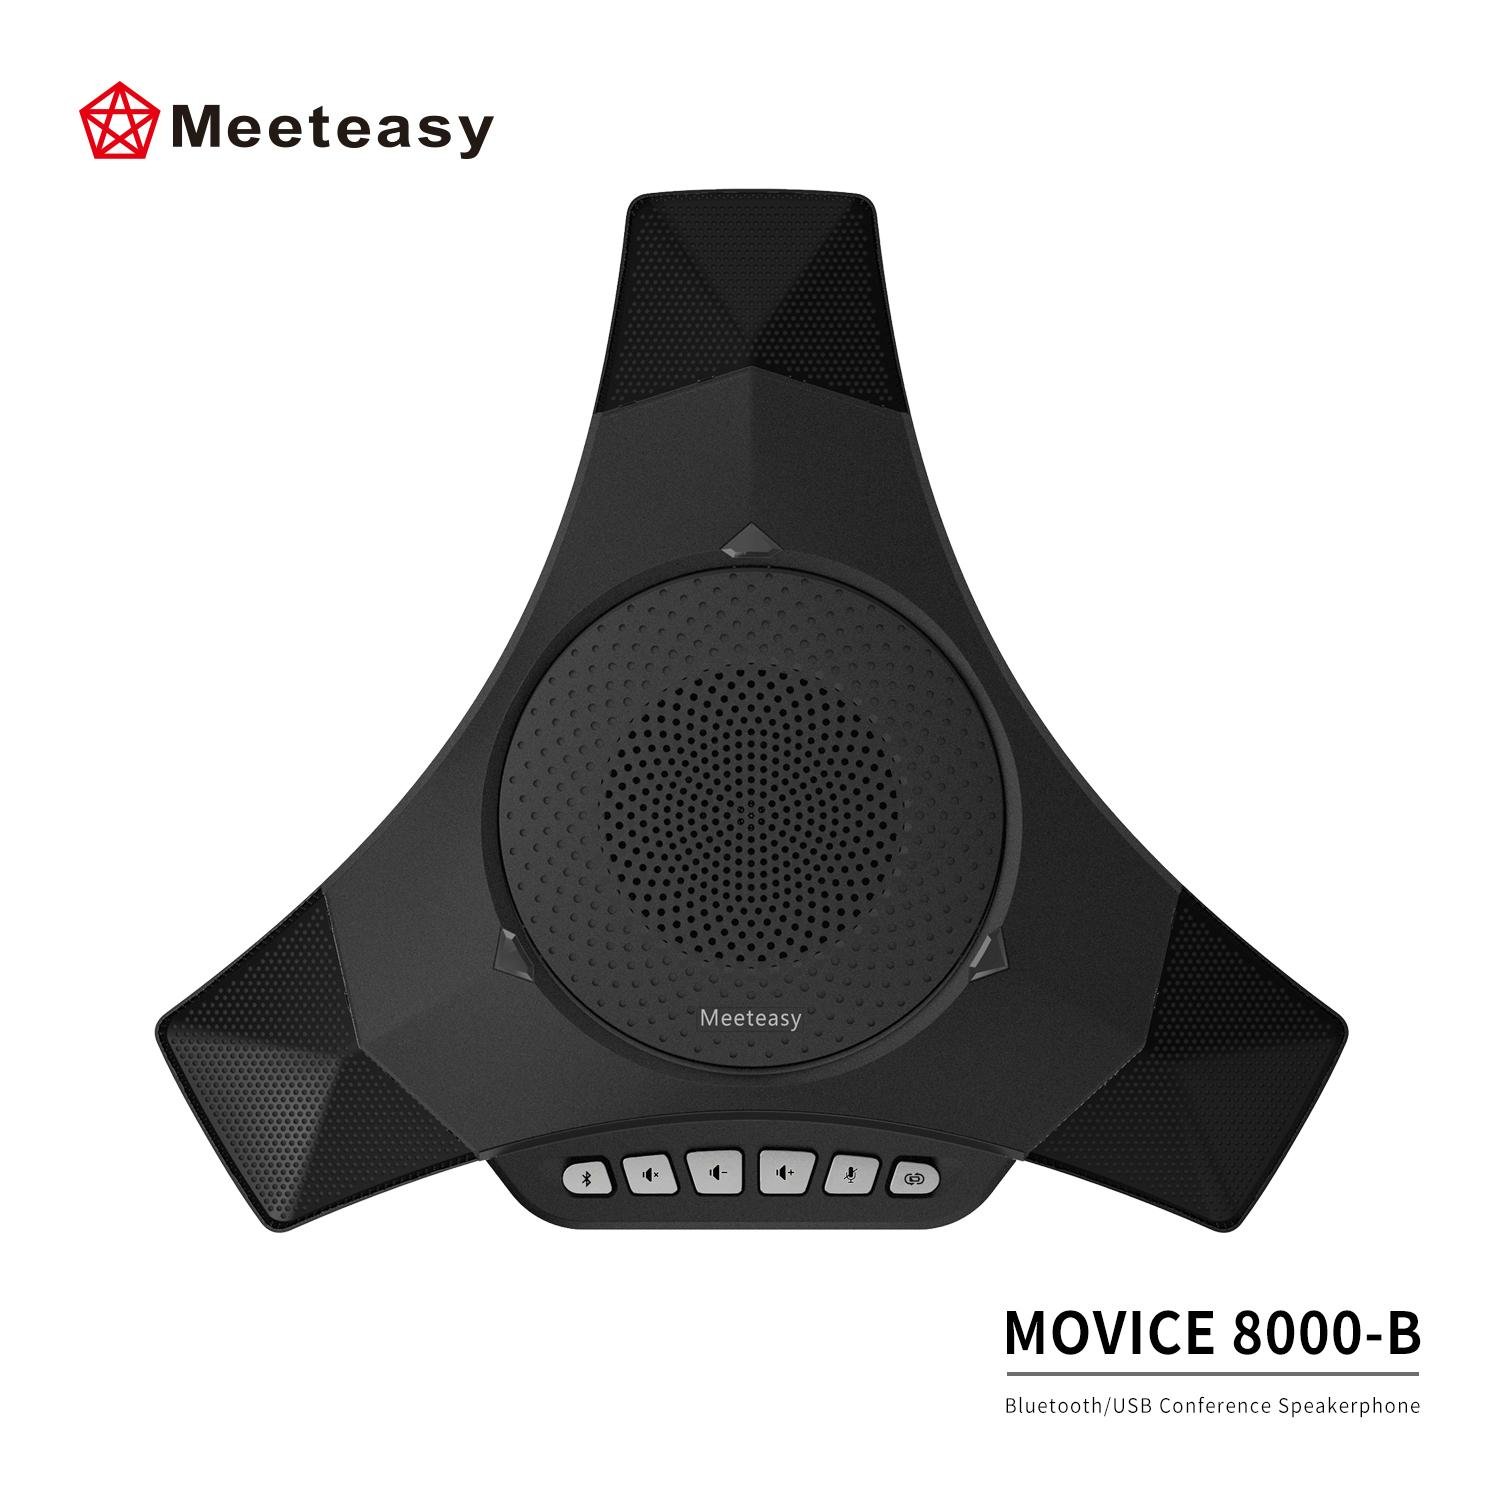 Meeteasy MVOICE 8000-B BT Conference Speakerphone for Web Based Conferencing 2